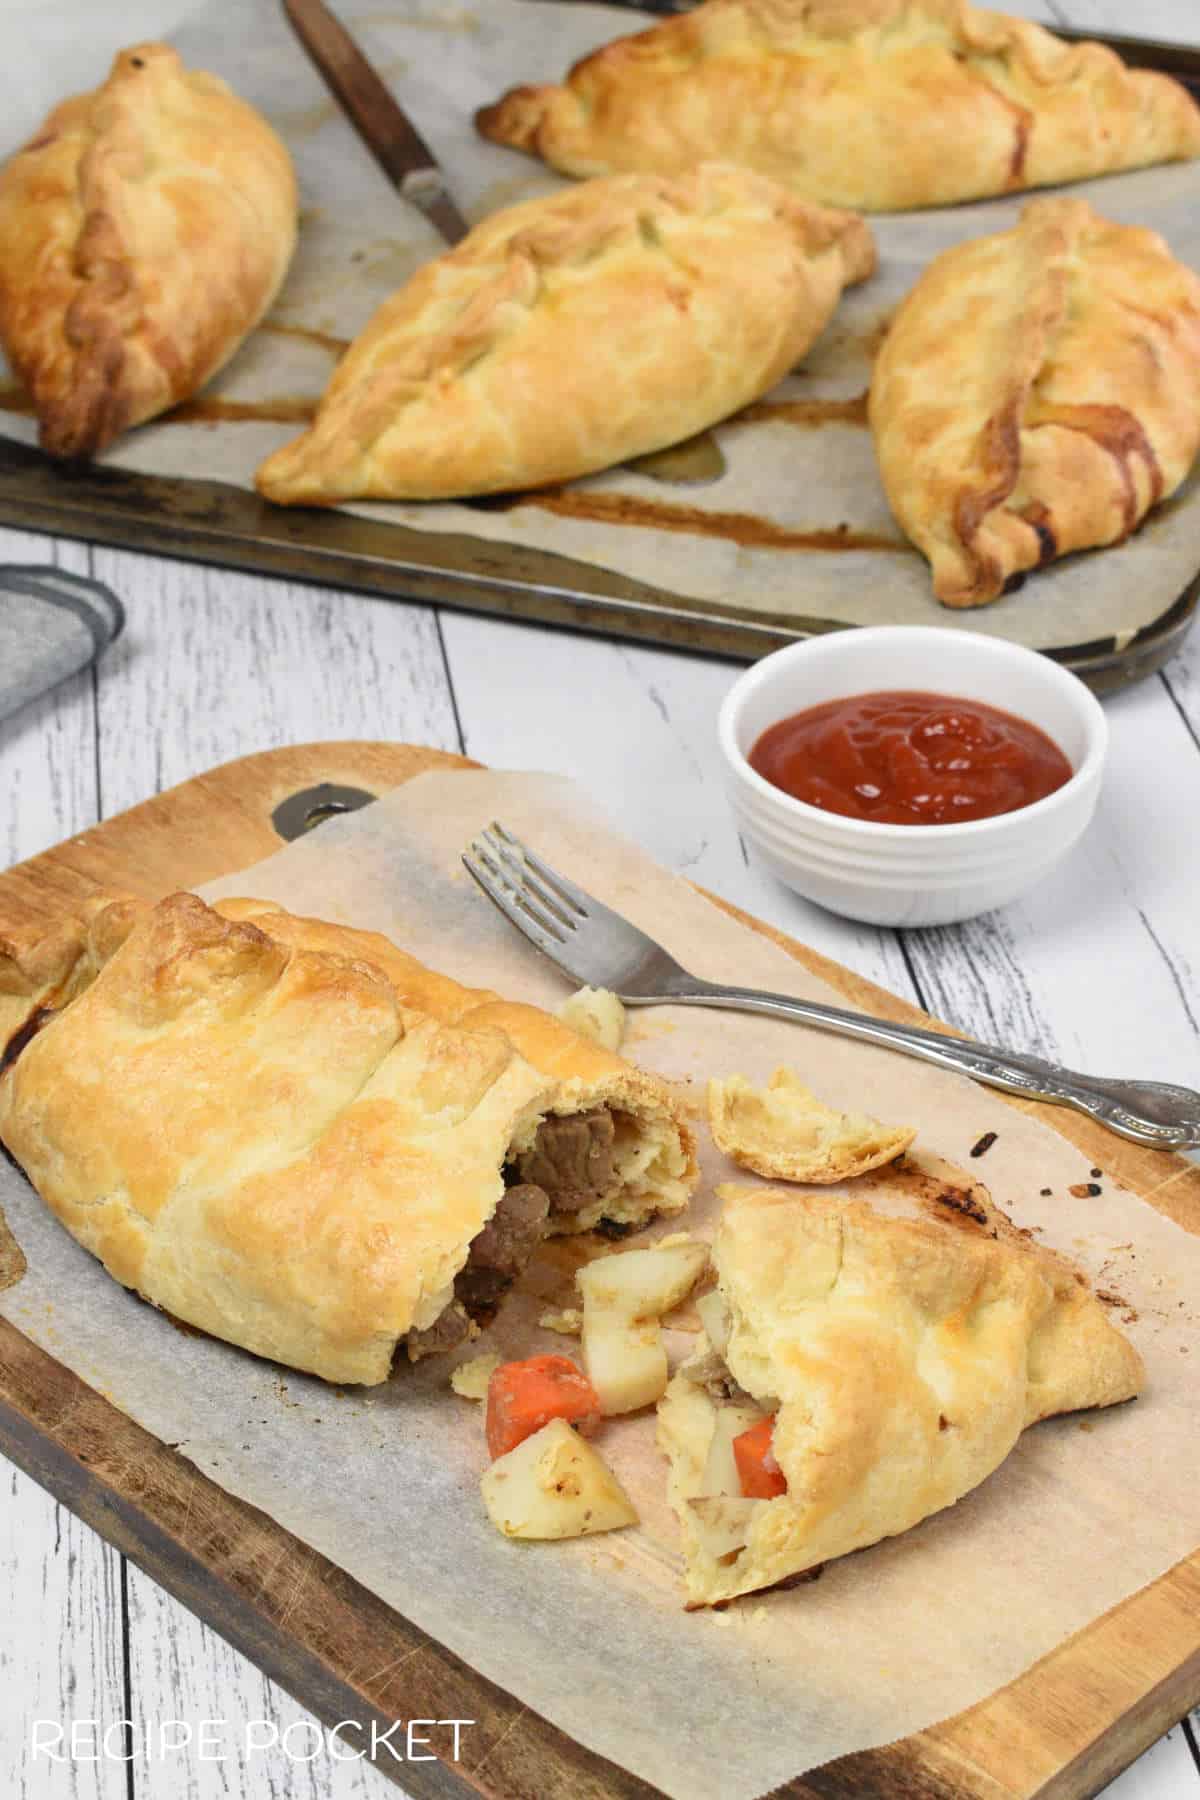 Image showing the filling inside a pasty.